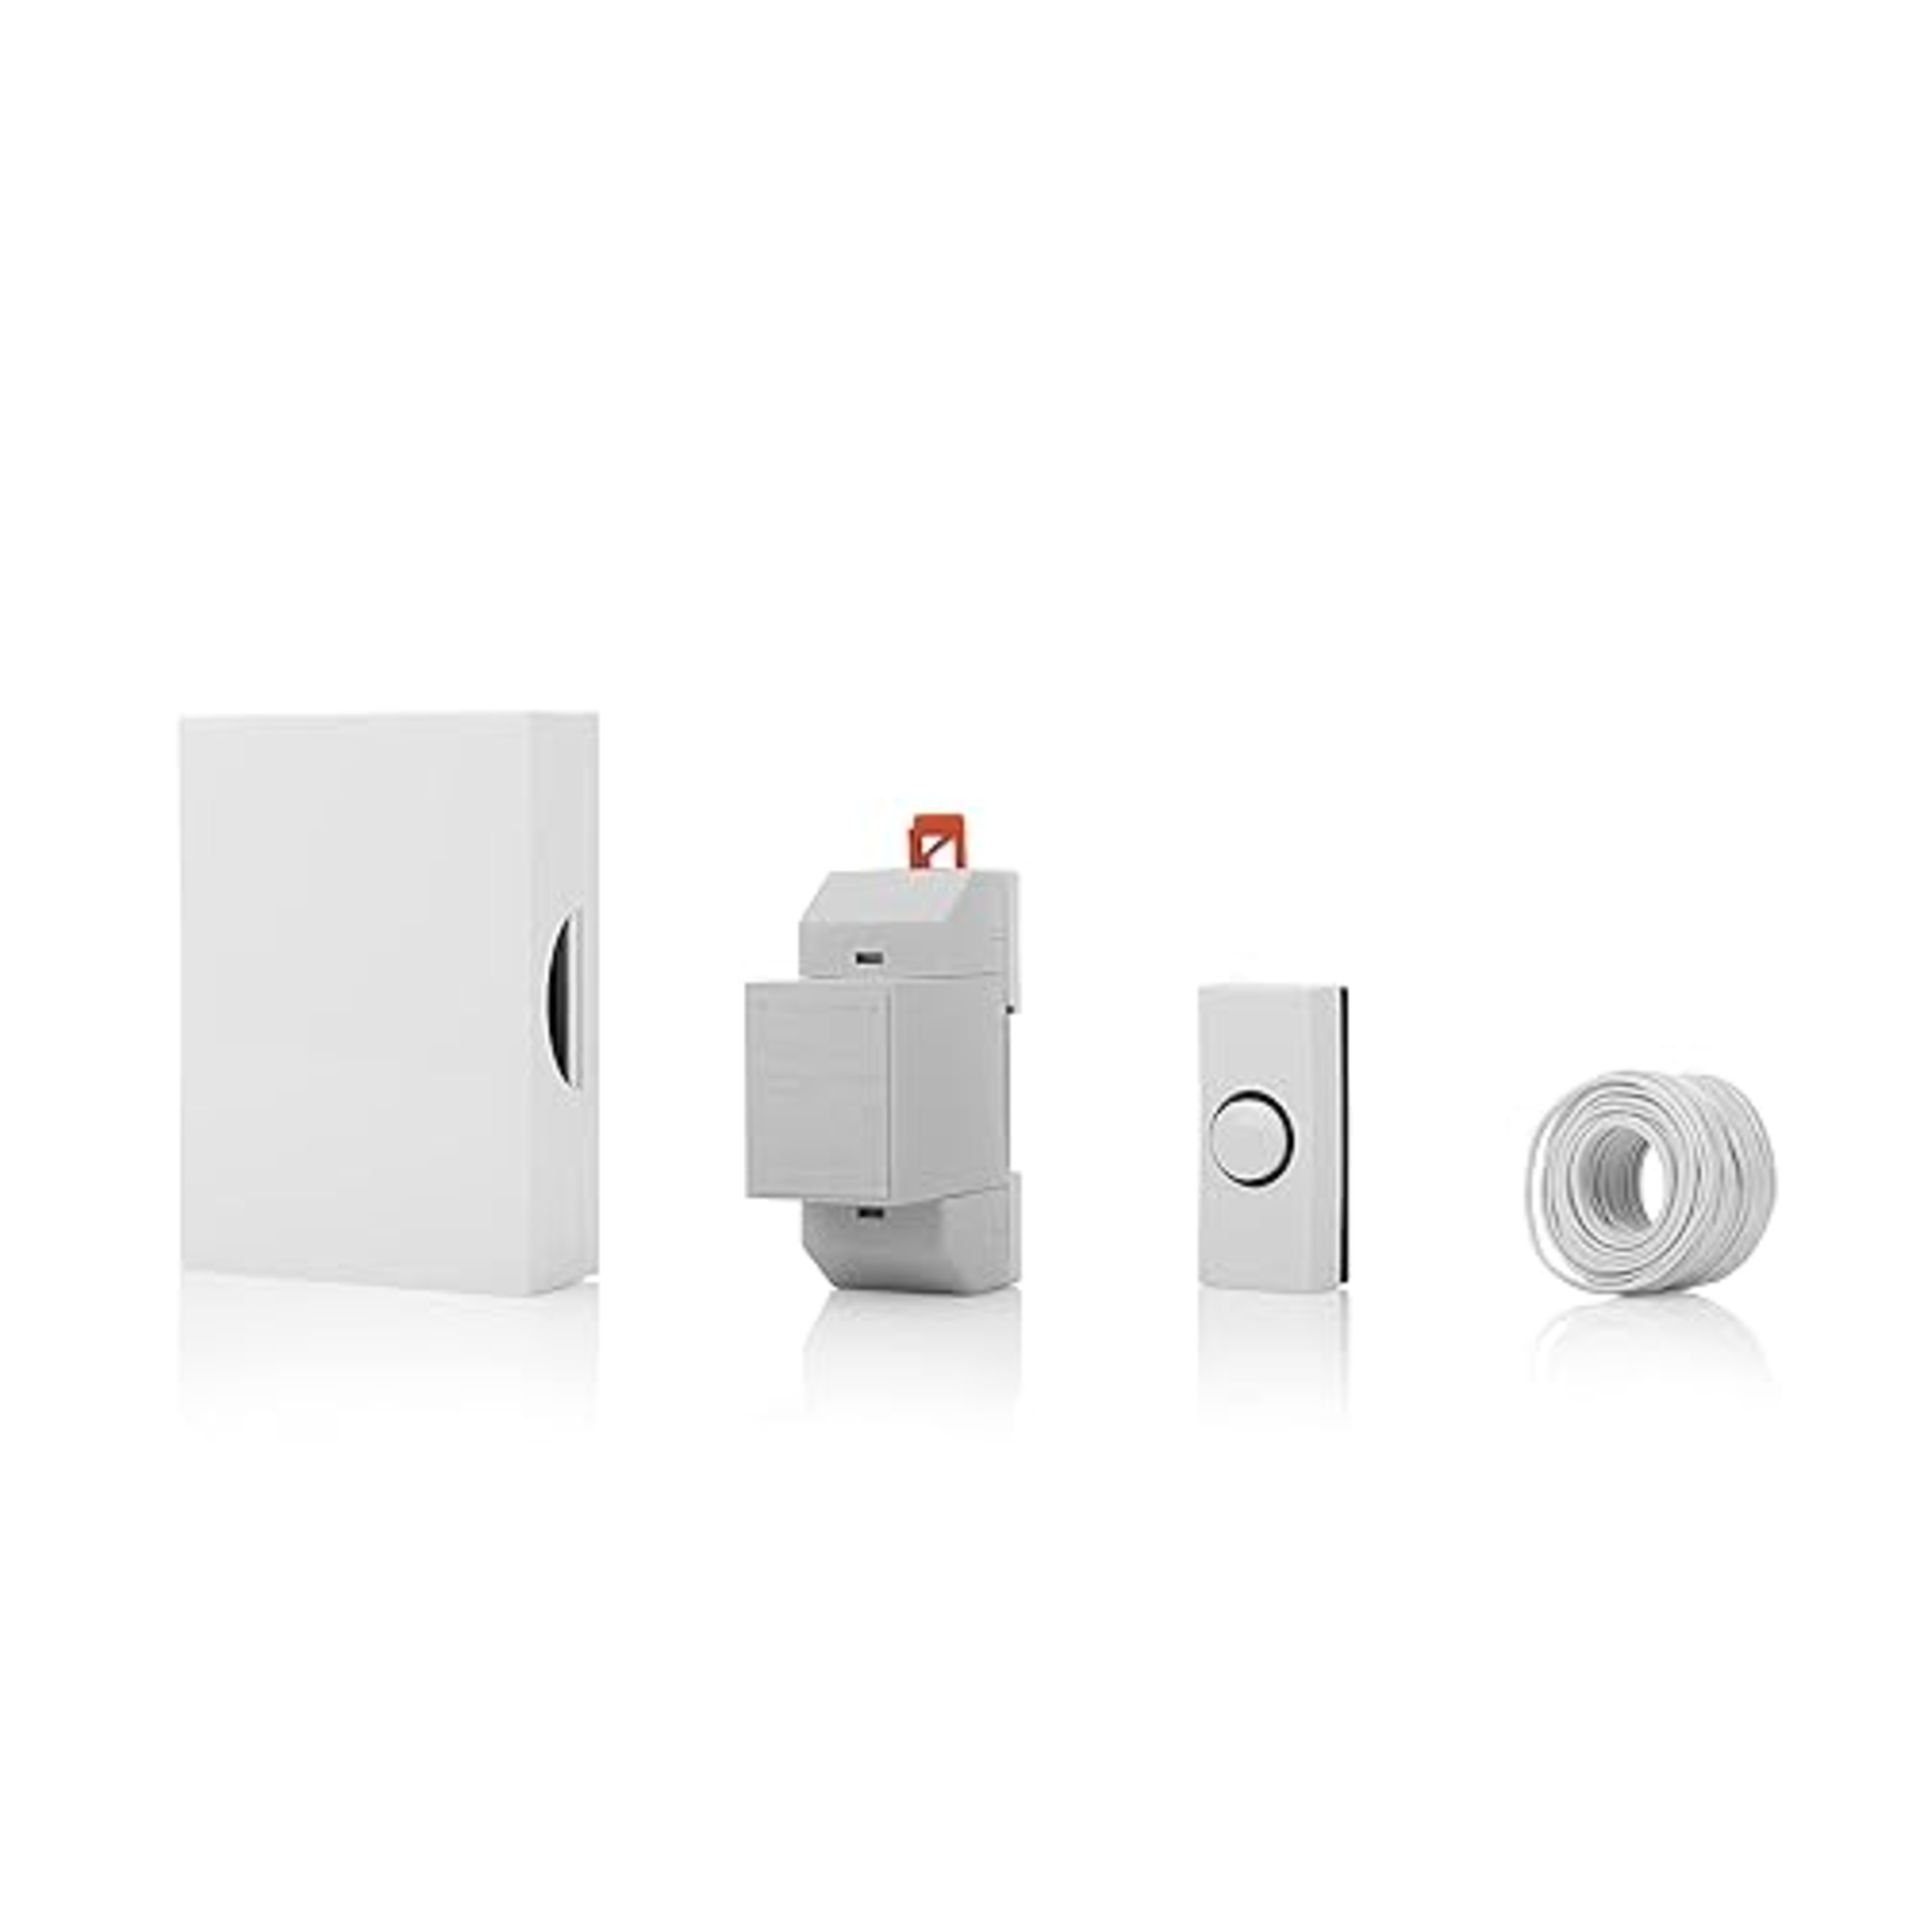 Byron 720k Wired Doorbell Set, Wired Doorbell, Push Bell, Transformer, Cable and Clips